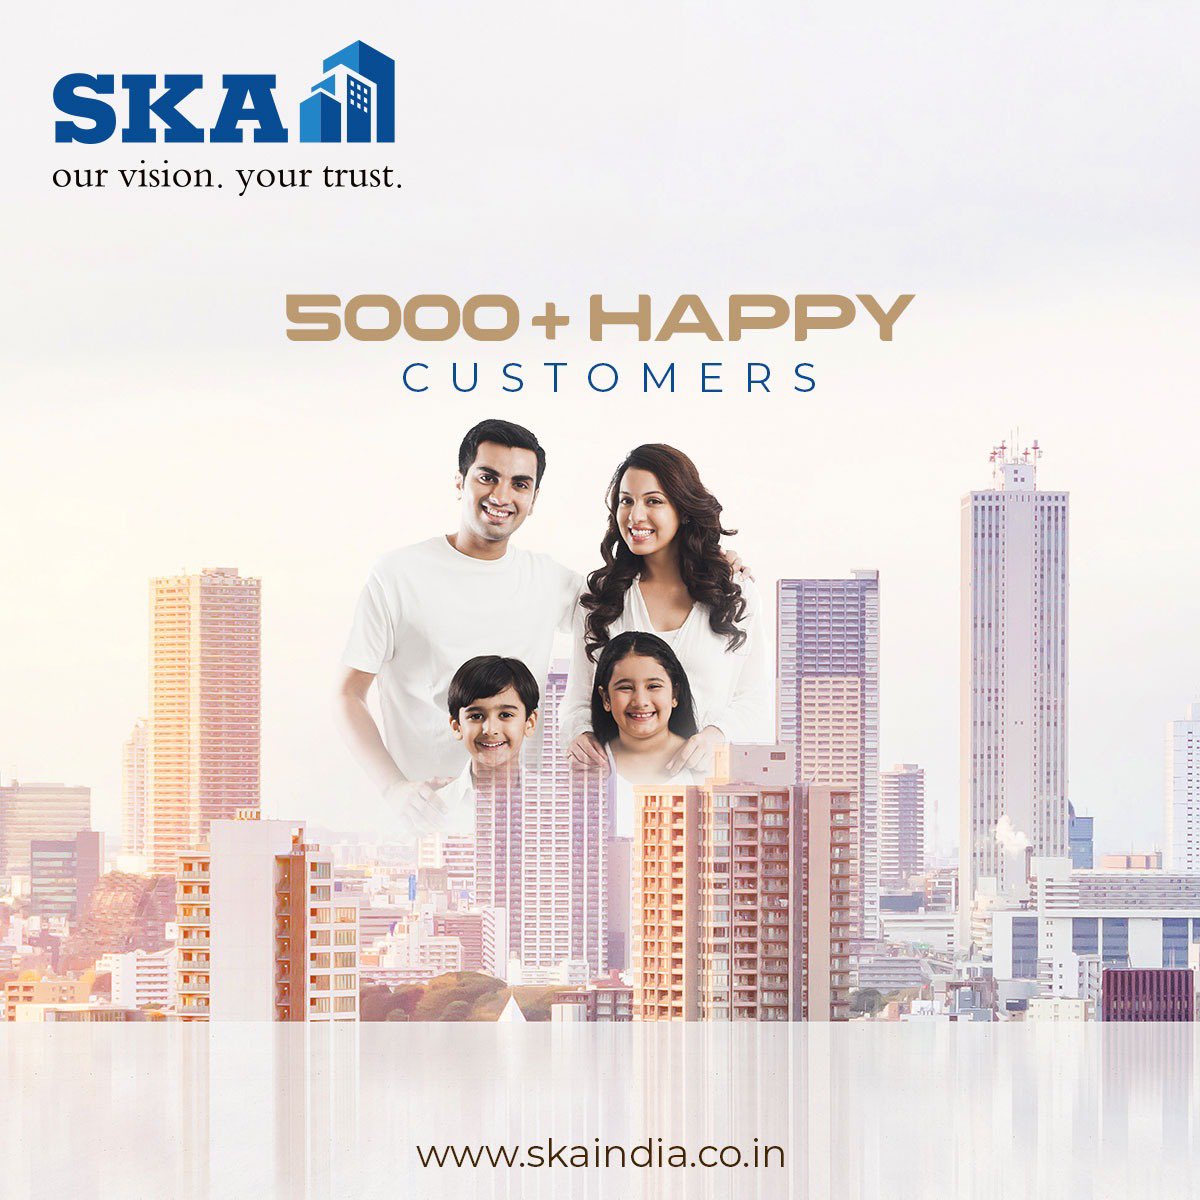 Building futures, creating memories! Over 5000 families have found their happy spaces with SKA Group. Your trust, our vision.

For details call us on +91 7852862626
Or visit: skaindia.co.in

#SKA #SKAGroup #SKAGroupindia #RealEstate
#DreamHome #RealEstateDevelopment